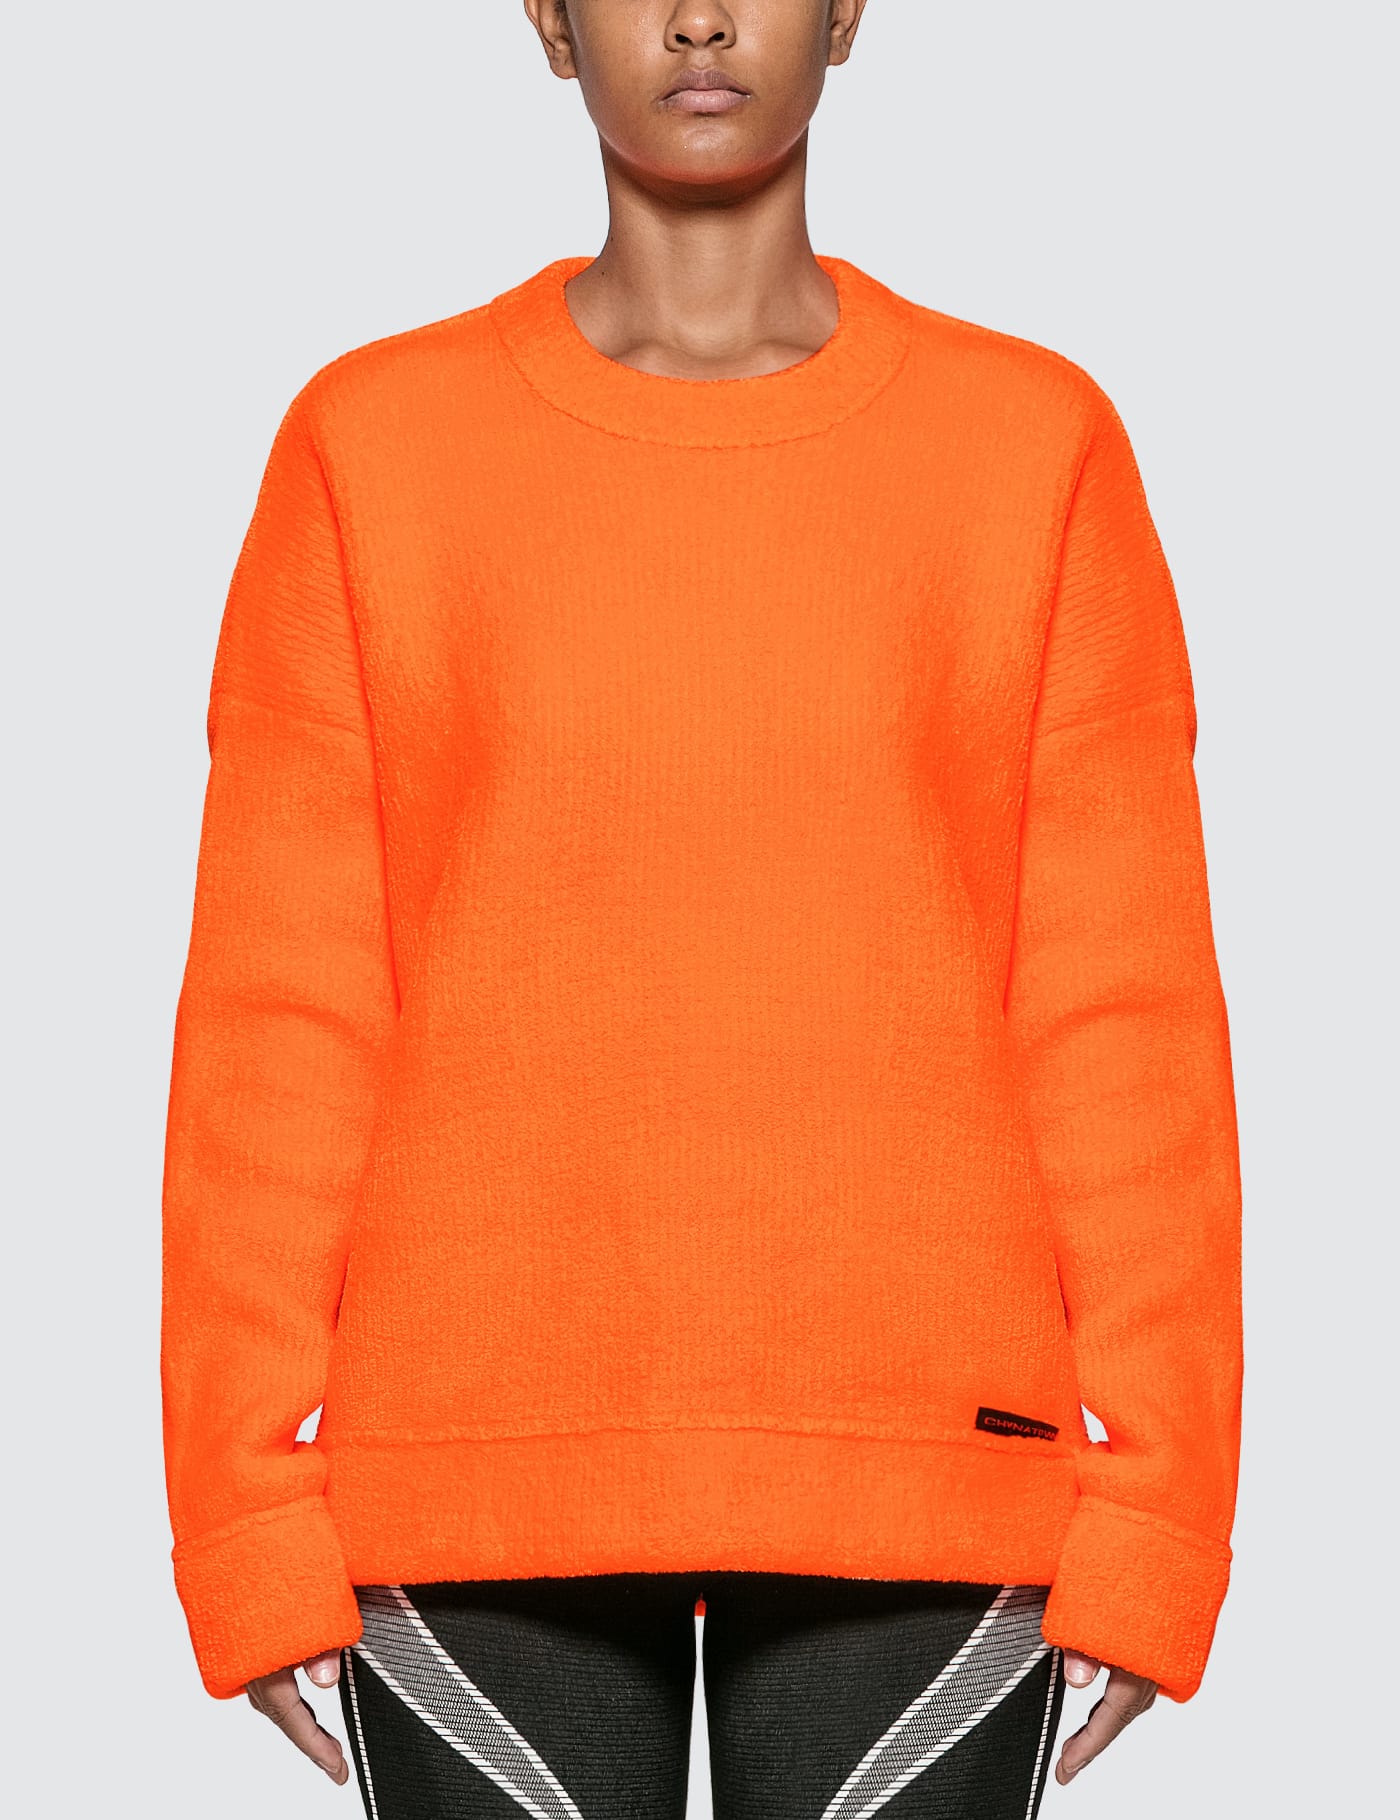 Alexander Wang - Chynatown Pullover | HBX - Globally Curated Fashion and  Lifestyle by Hypebeast